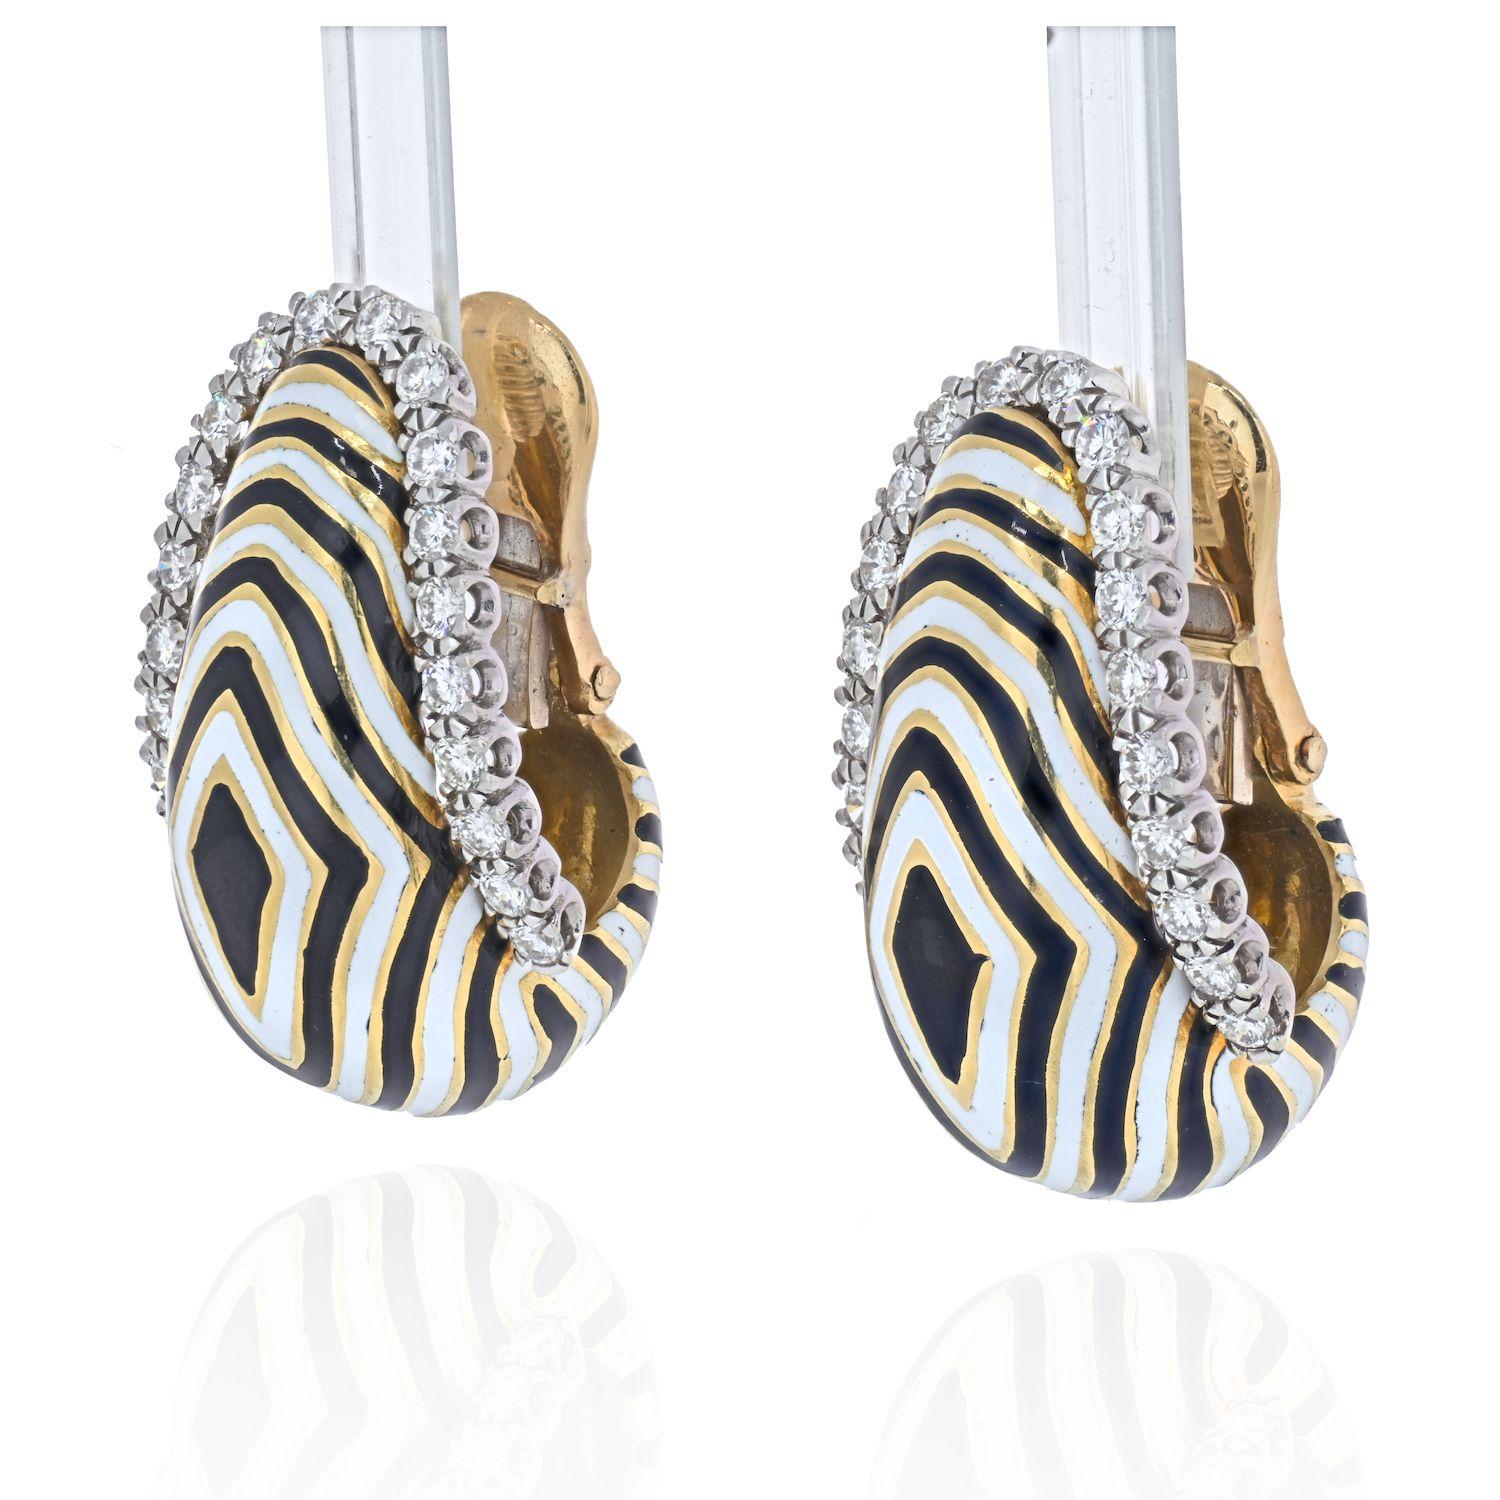 A current model from David Webb collection: Vreeland Zebra Striped Diamond Earrings. Black and white enamel is used to showcase the stunning animal-inspired motif. They're framed by 1.46-carats of brilliant-cut diamonds inlaid in a polished platinum